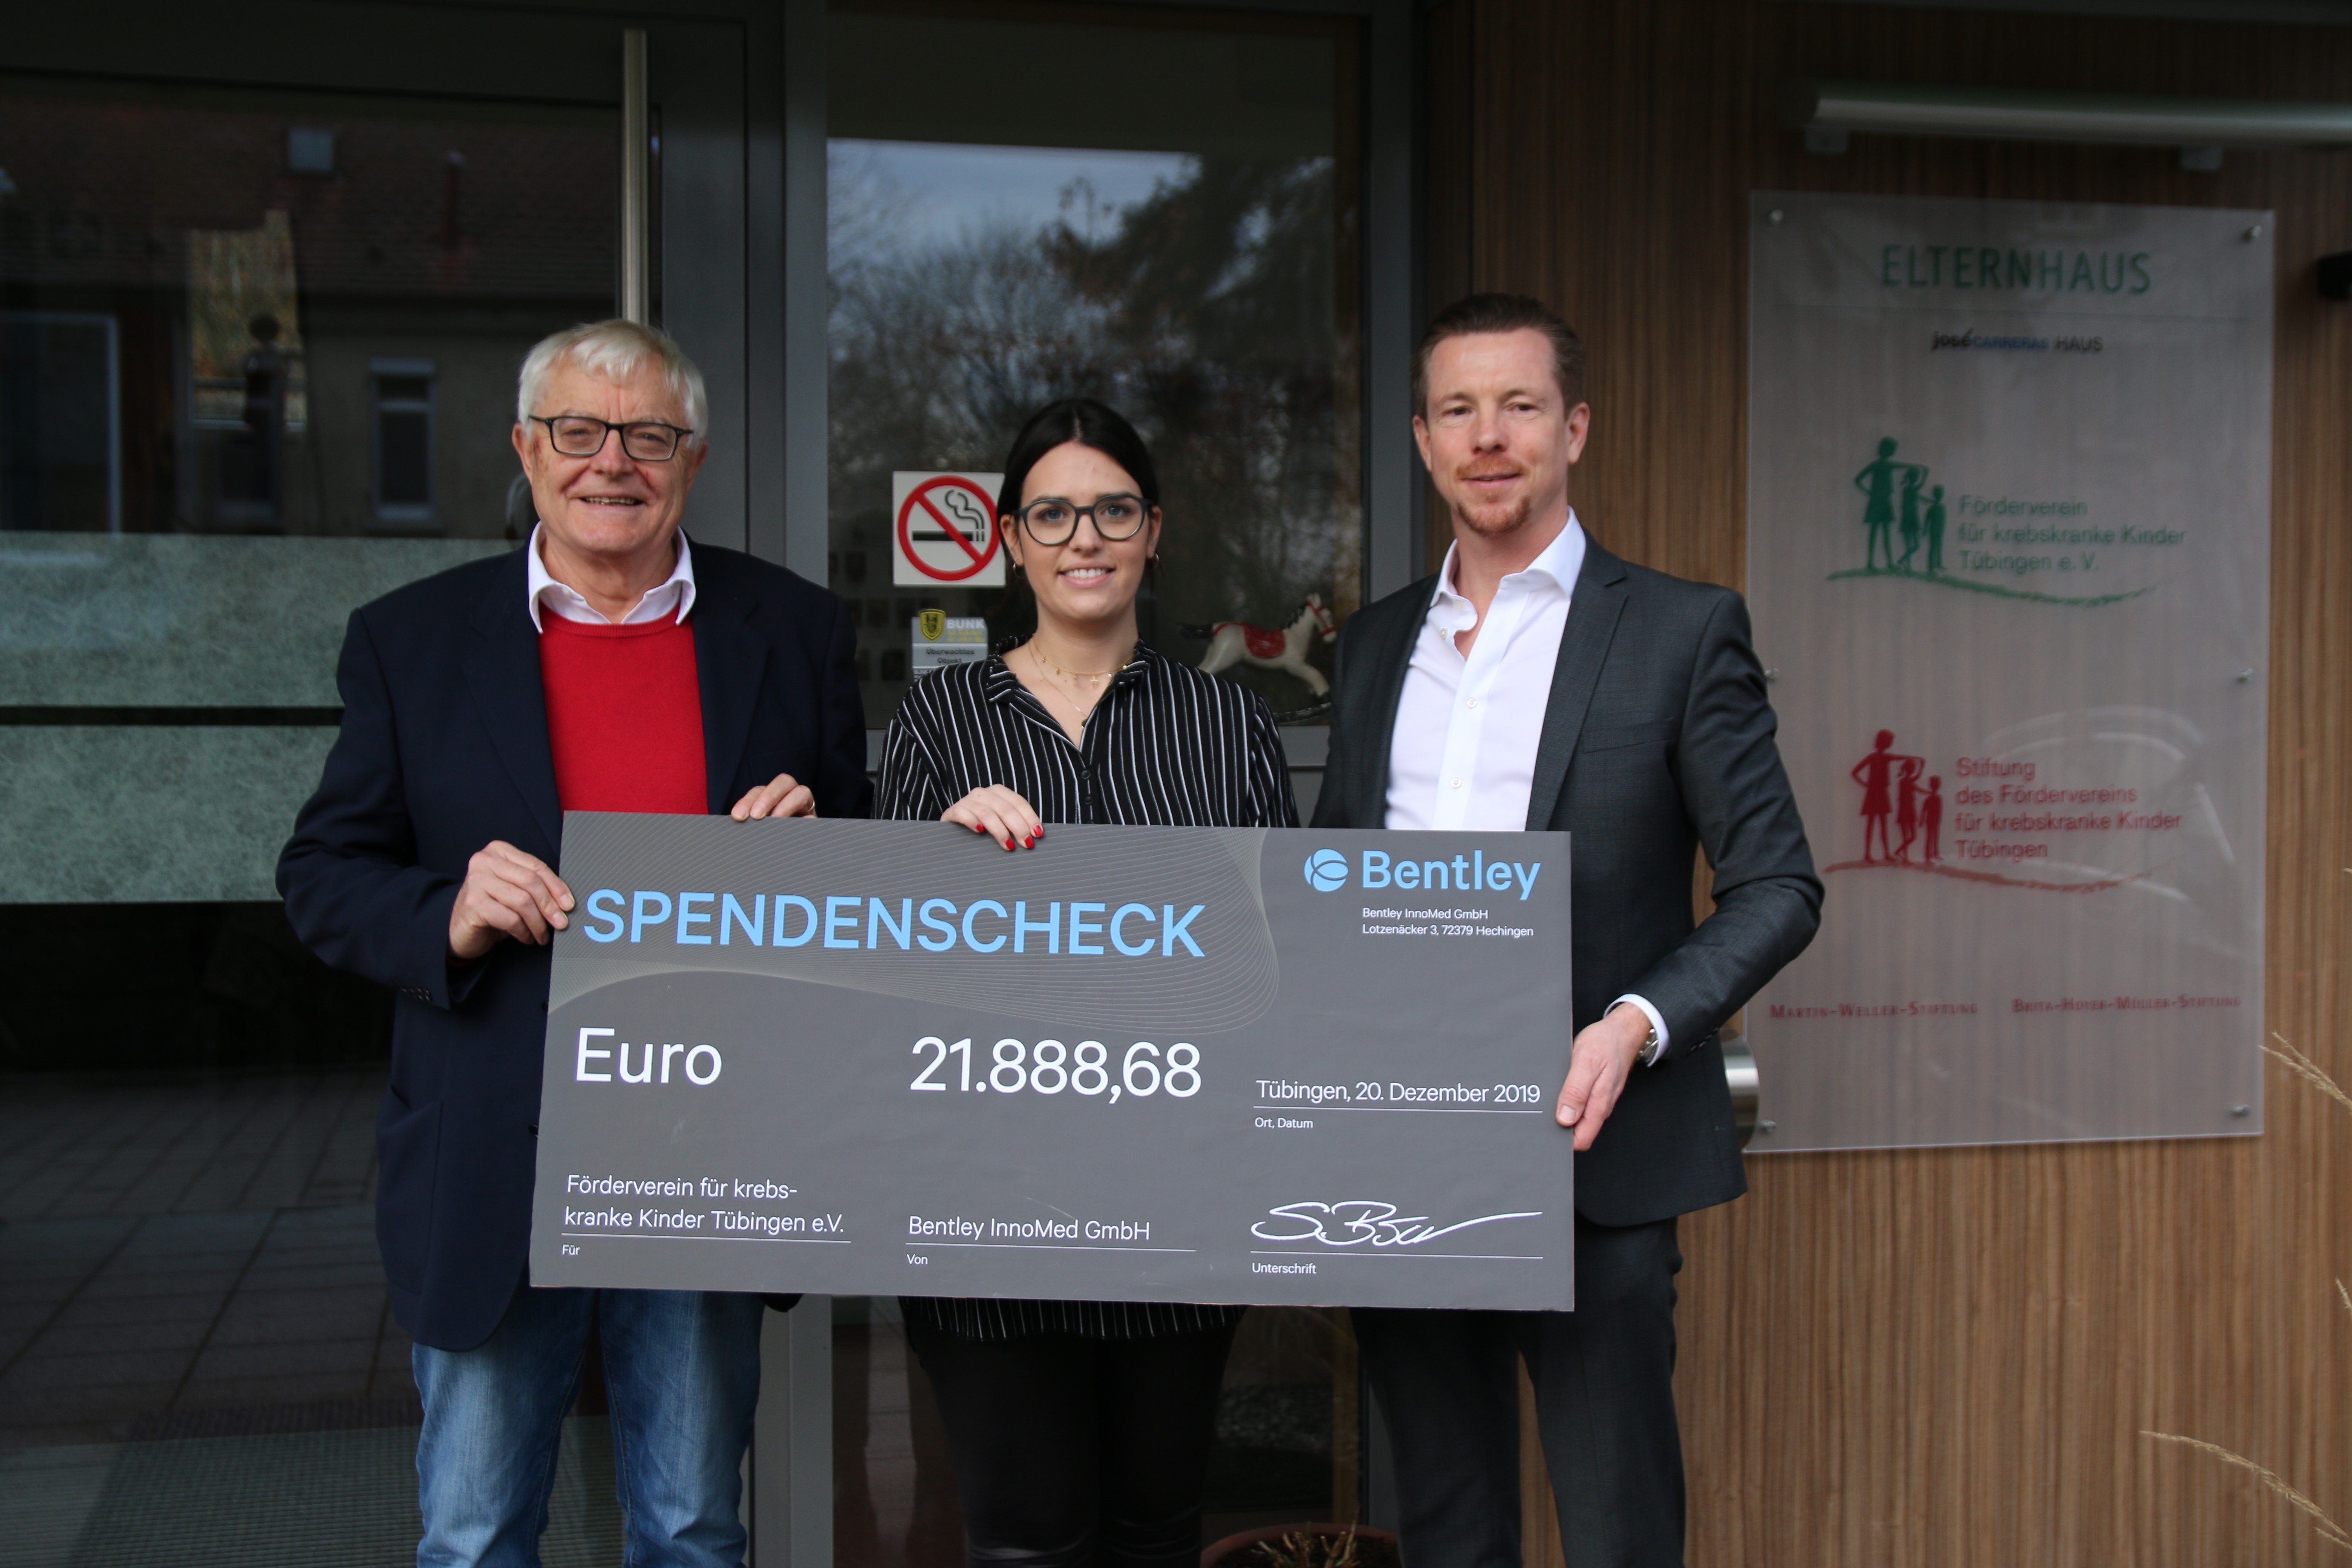 Bentley employees donate to charity supporting children with cancer and their families